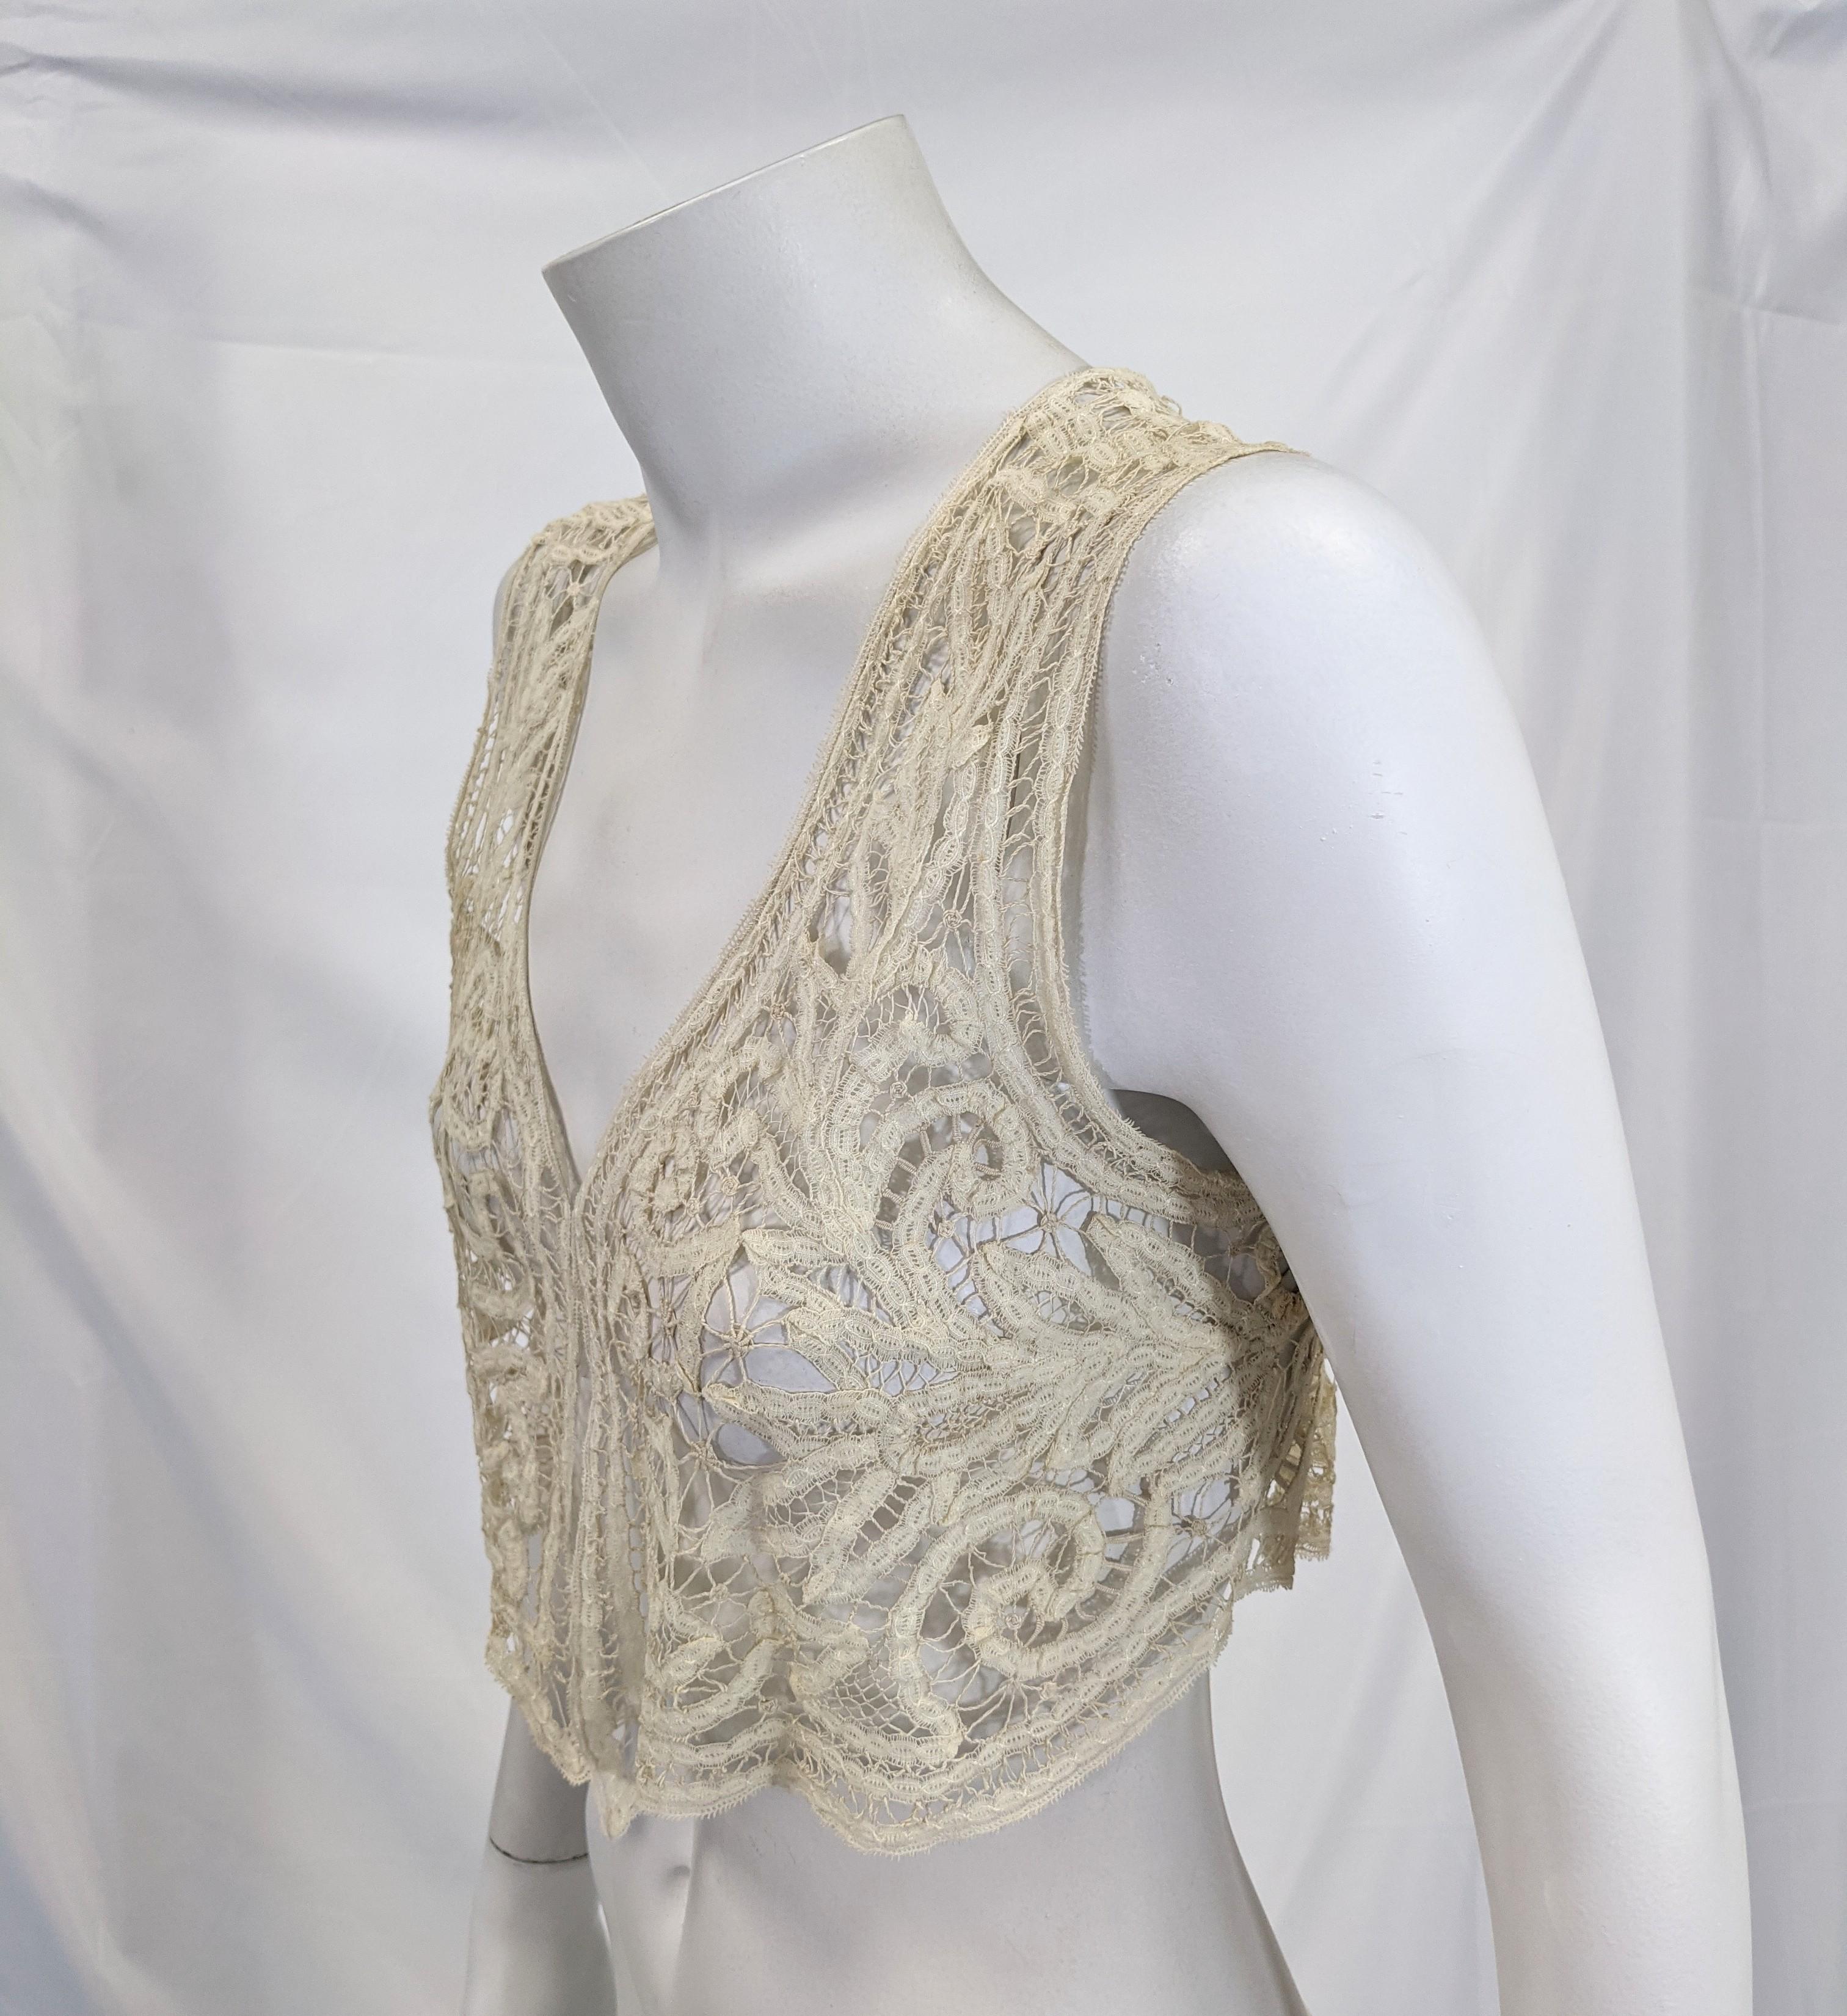 Lovely Edwardian fine ivory cotton handmade tape lace vest with an elaborate leaf and floral motif .
Excellent Condition. Small size 0-2-4
bust 30